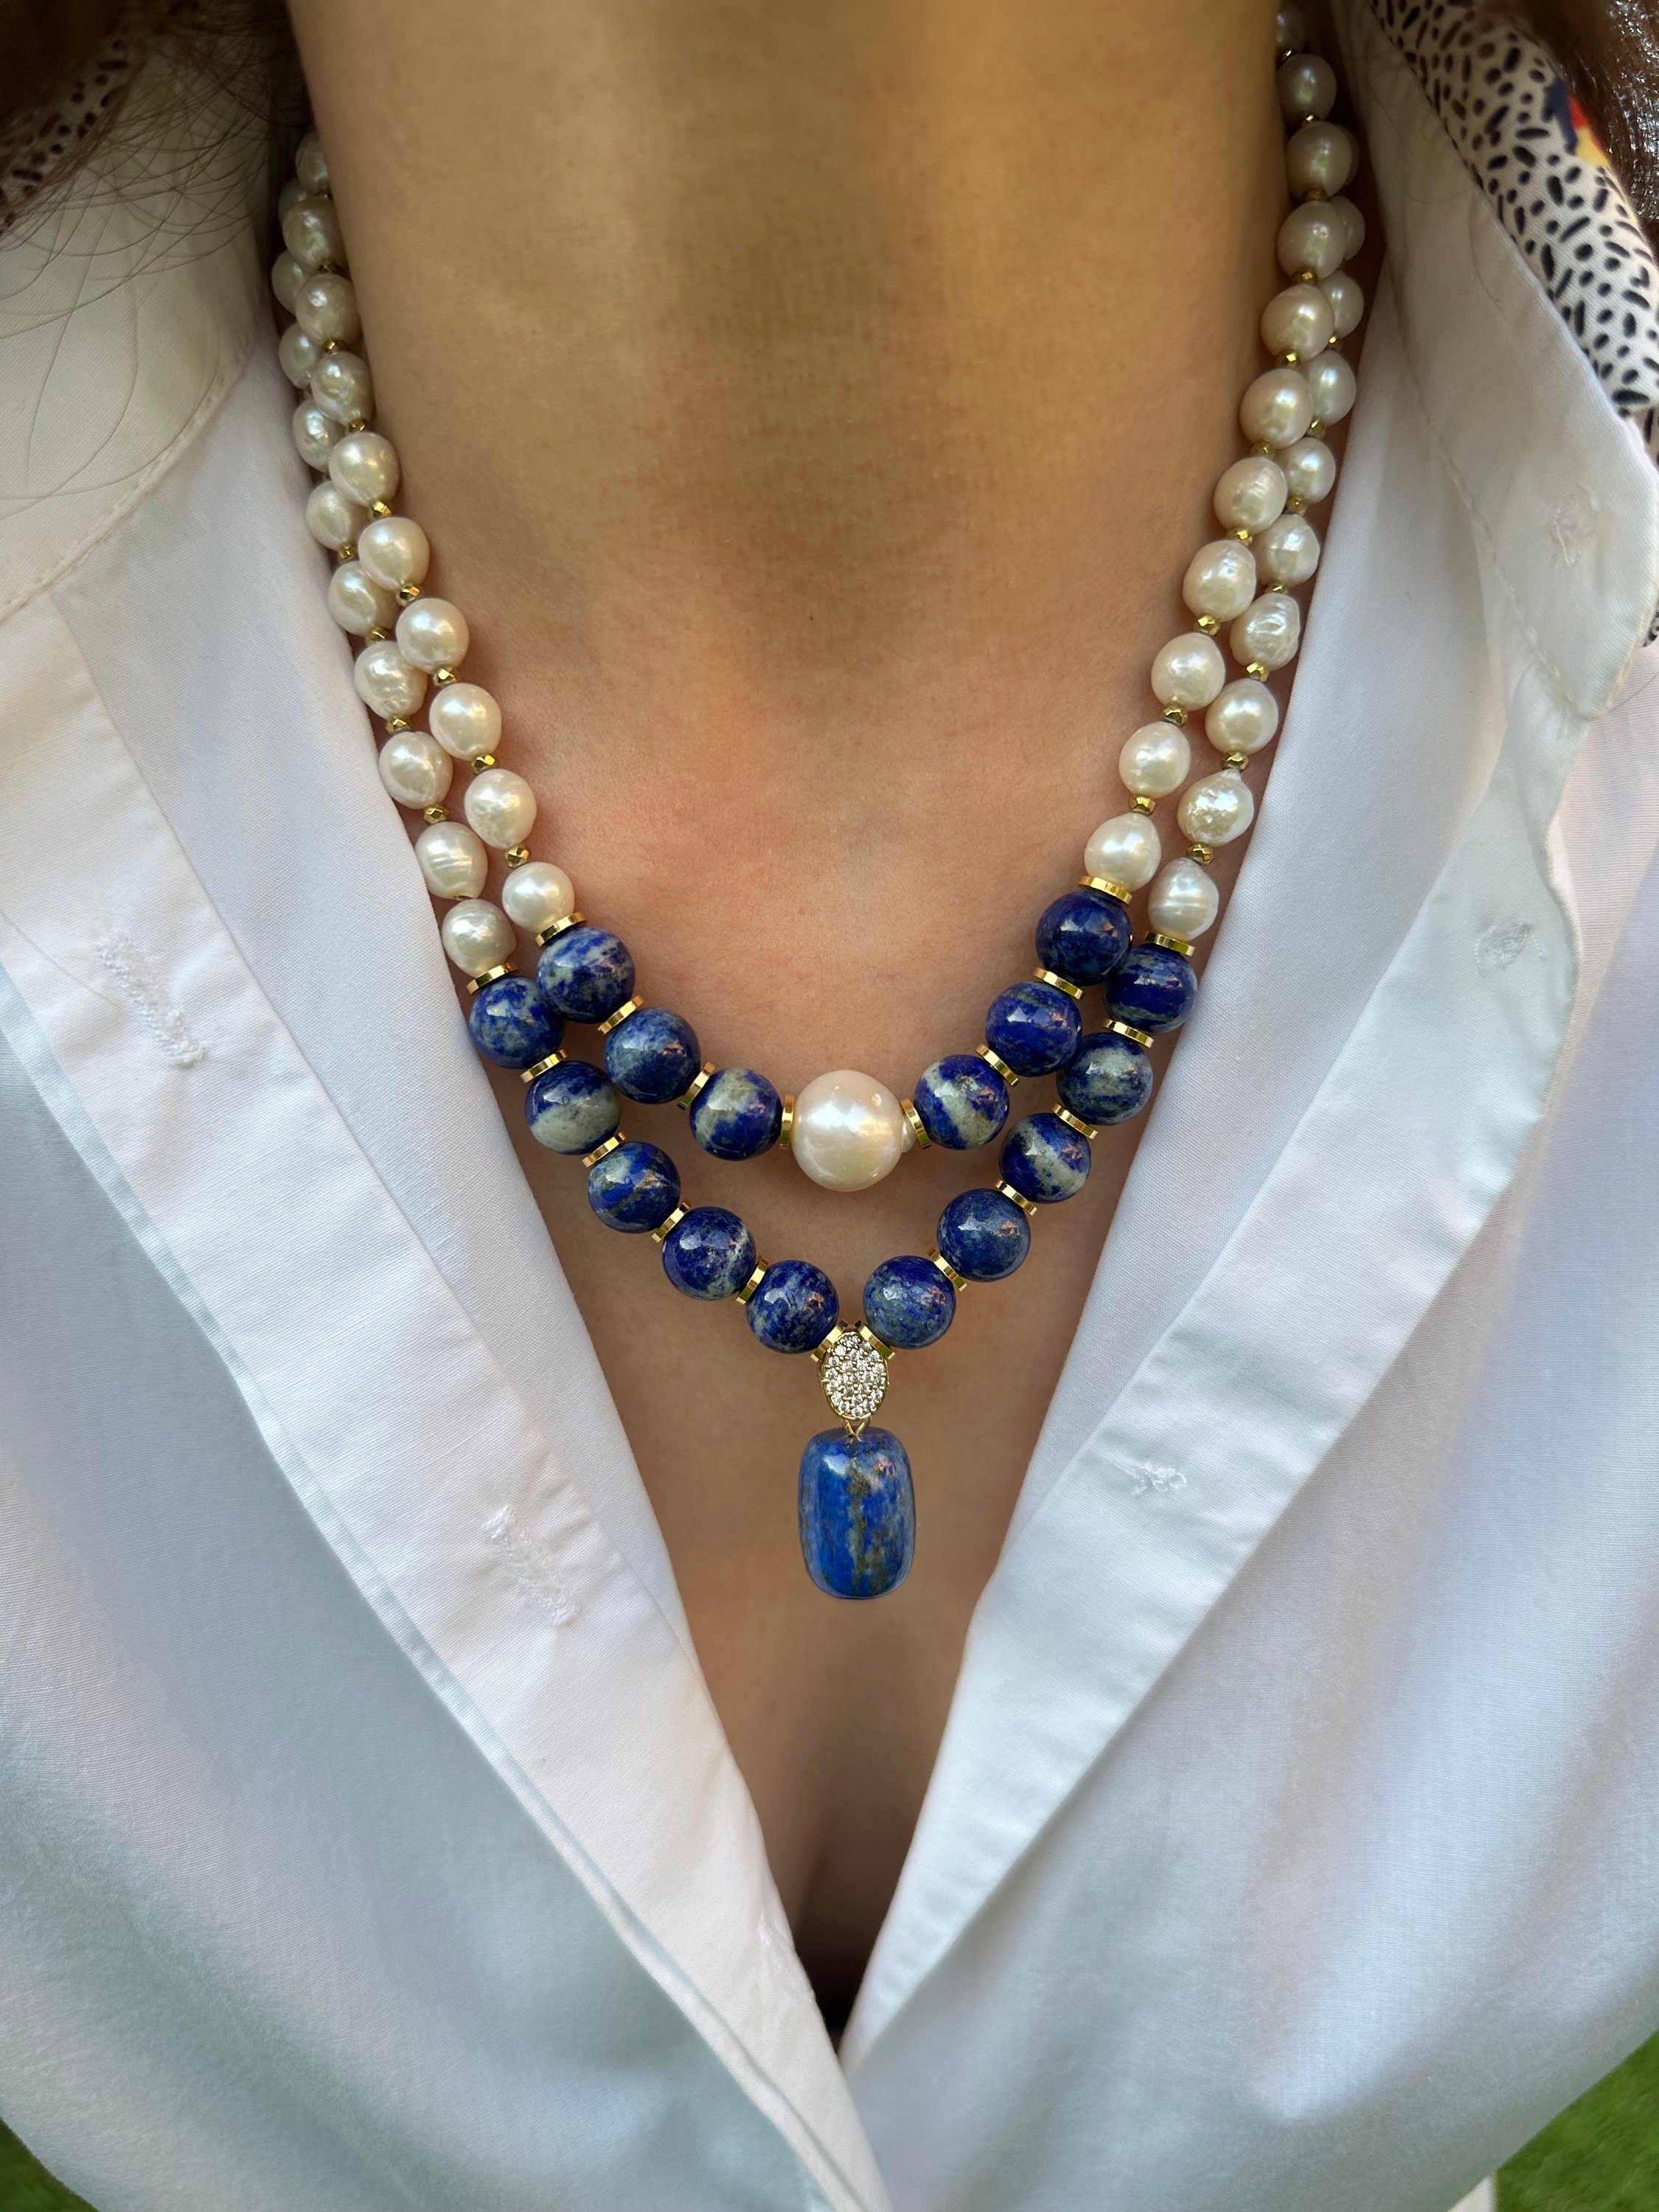 Lapis Lazuli Necklace, Pearl and Gemstone Jewelry for Birthday